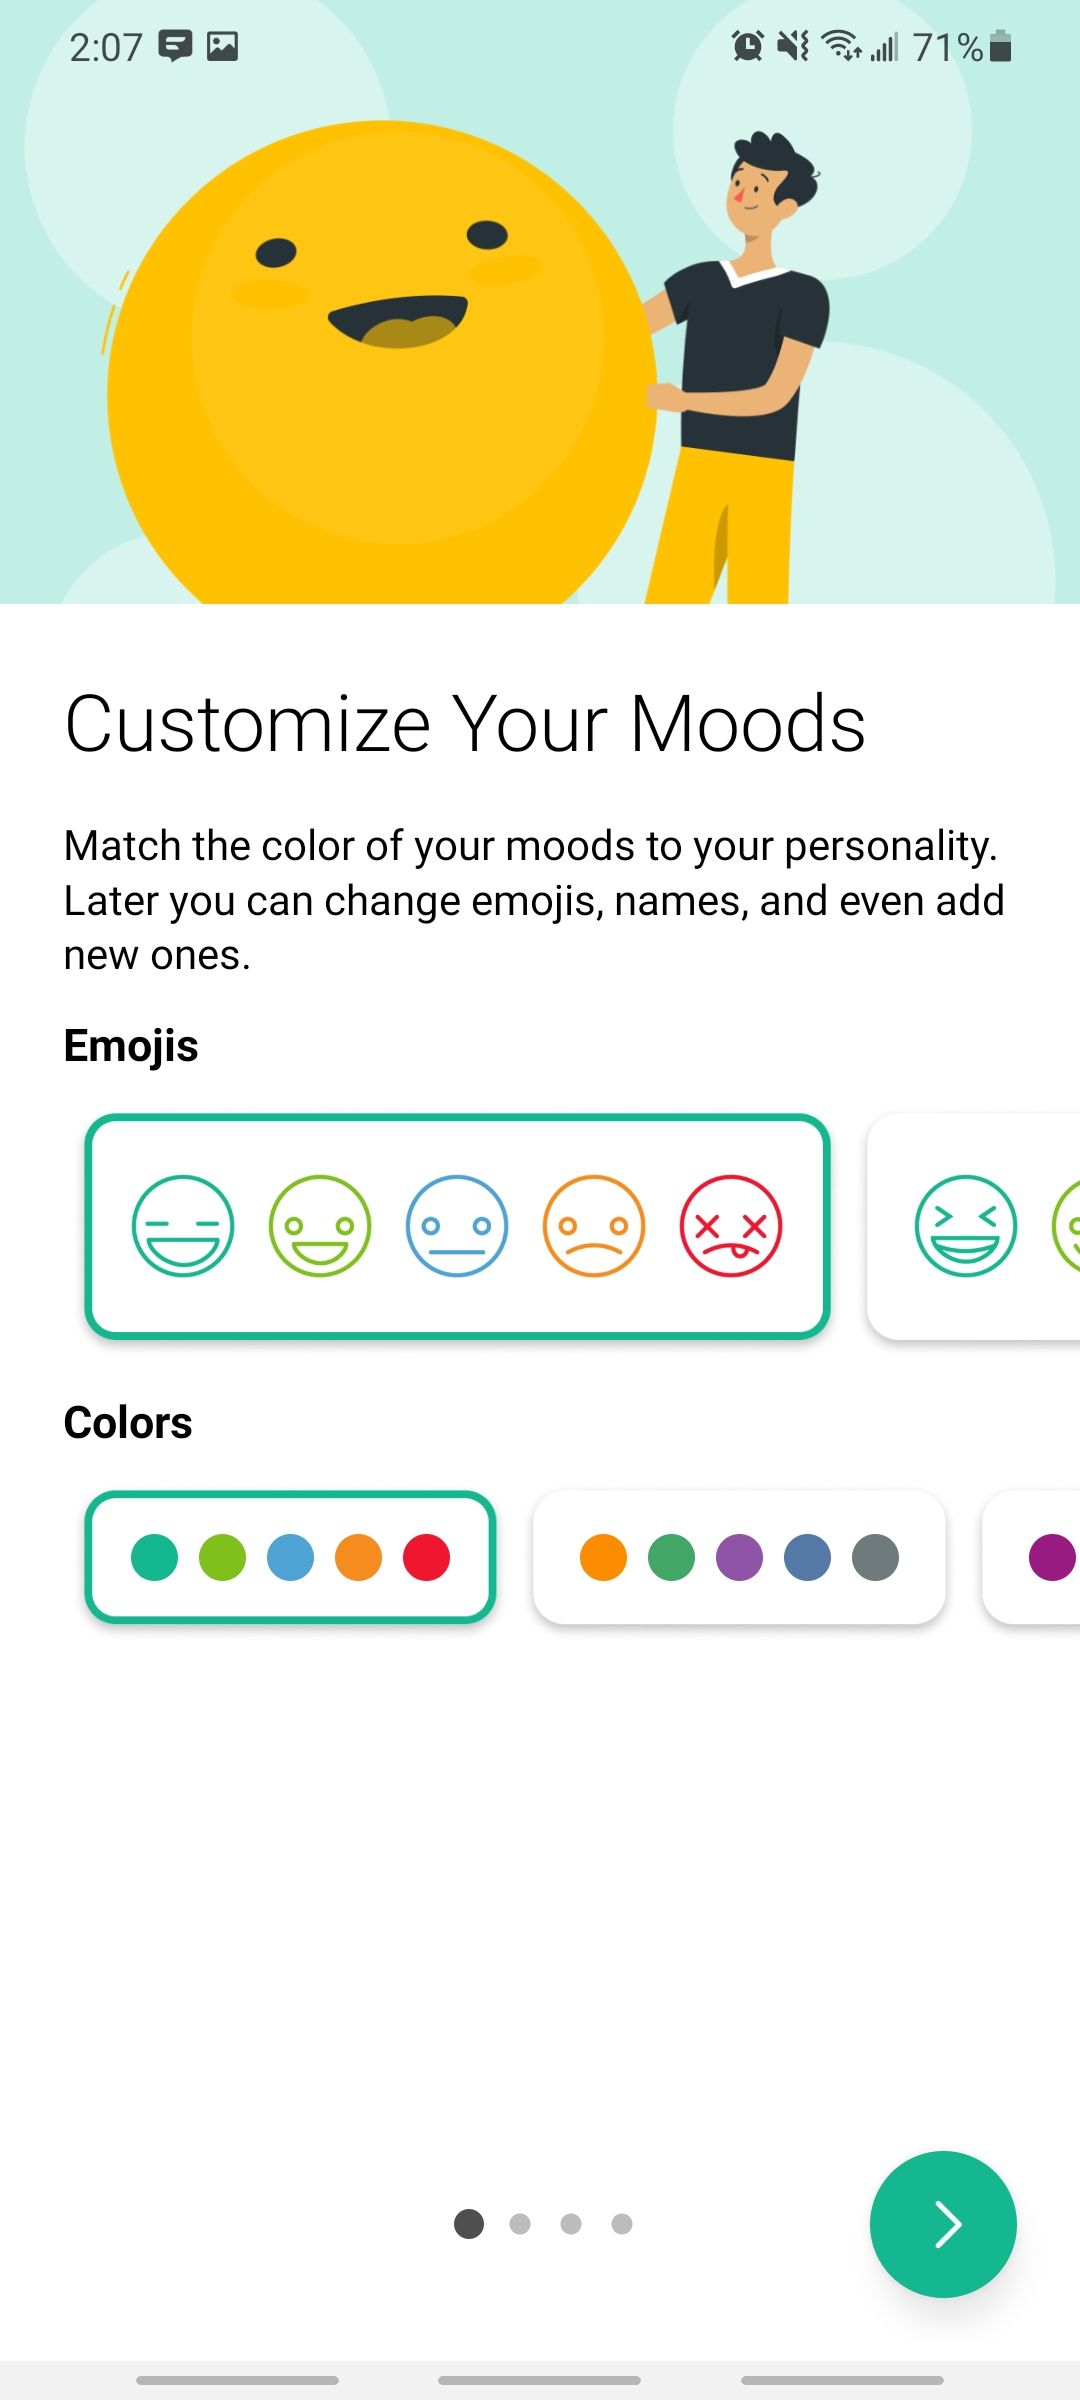 daylio app allows you to customize your moods